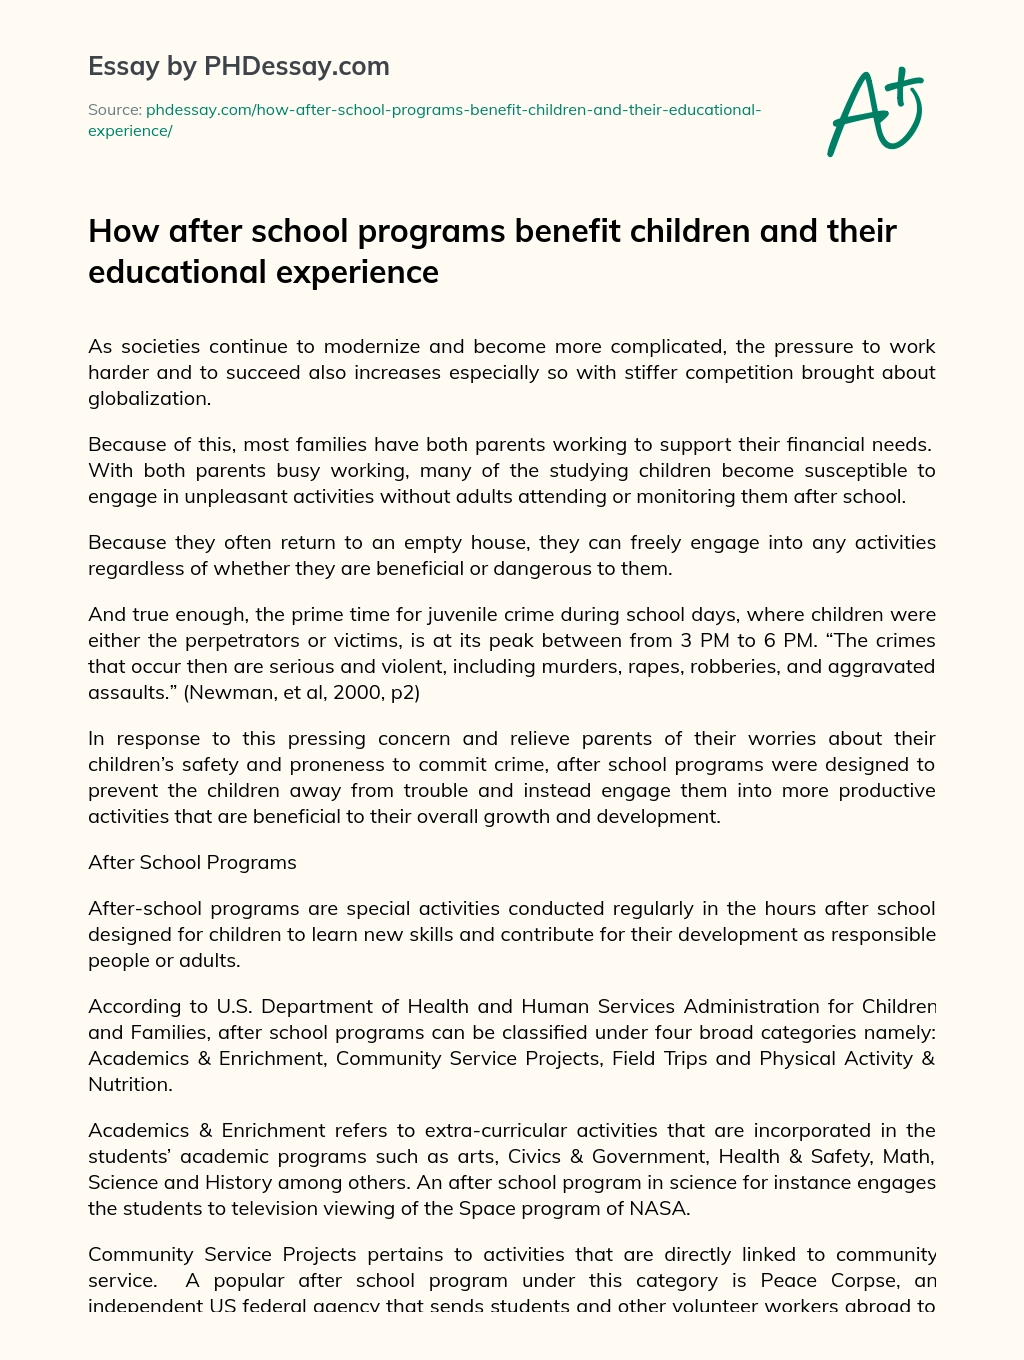 How after school programs benefit children and their educational experience essay